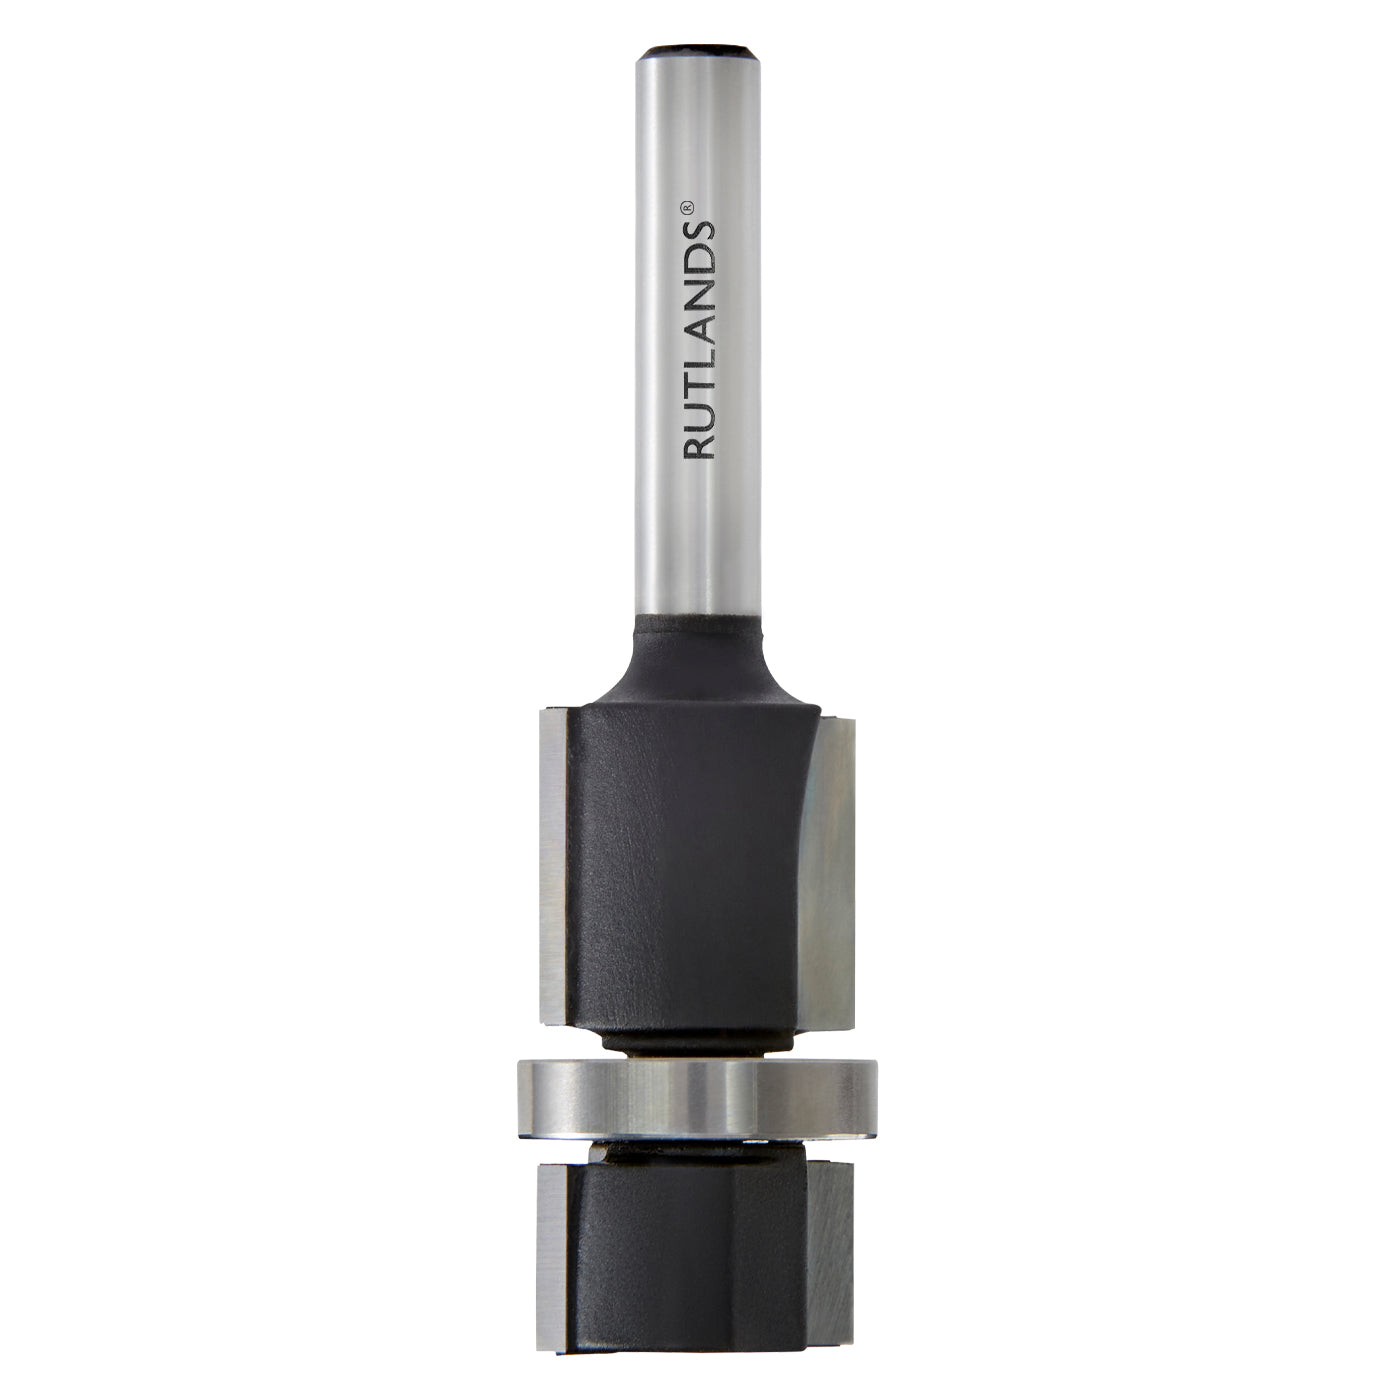 Router Bit - Flush Trim with Central Bearing - D=18mm H1=15mm H2=9mm L=64.2mm S=1/4"